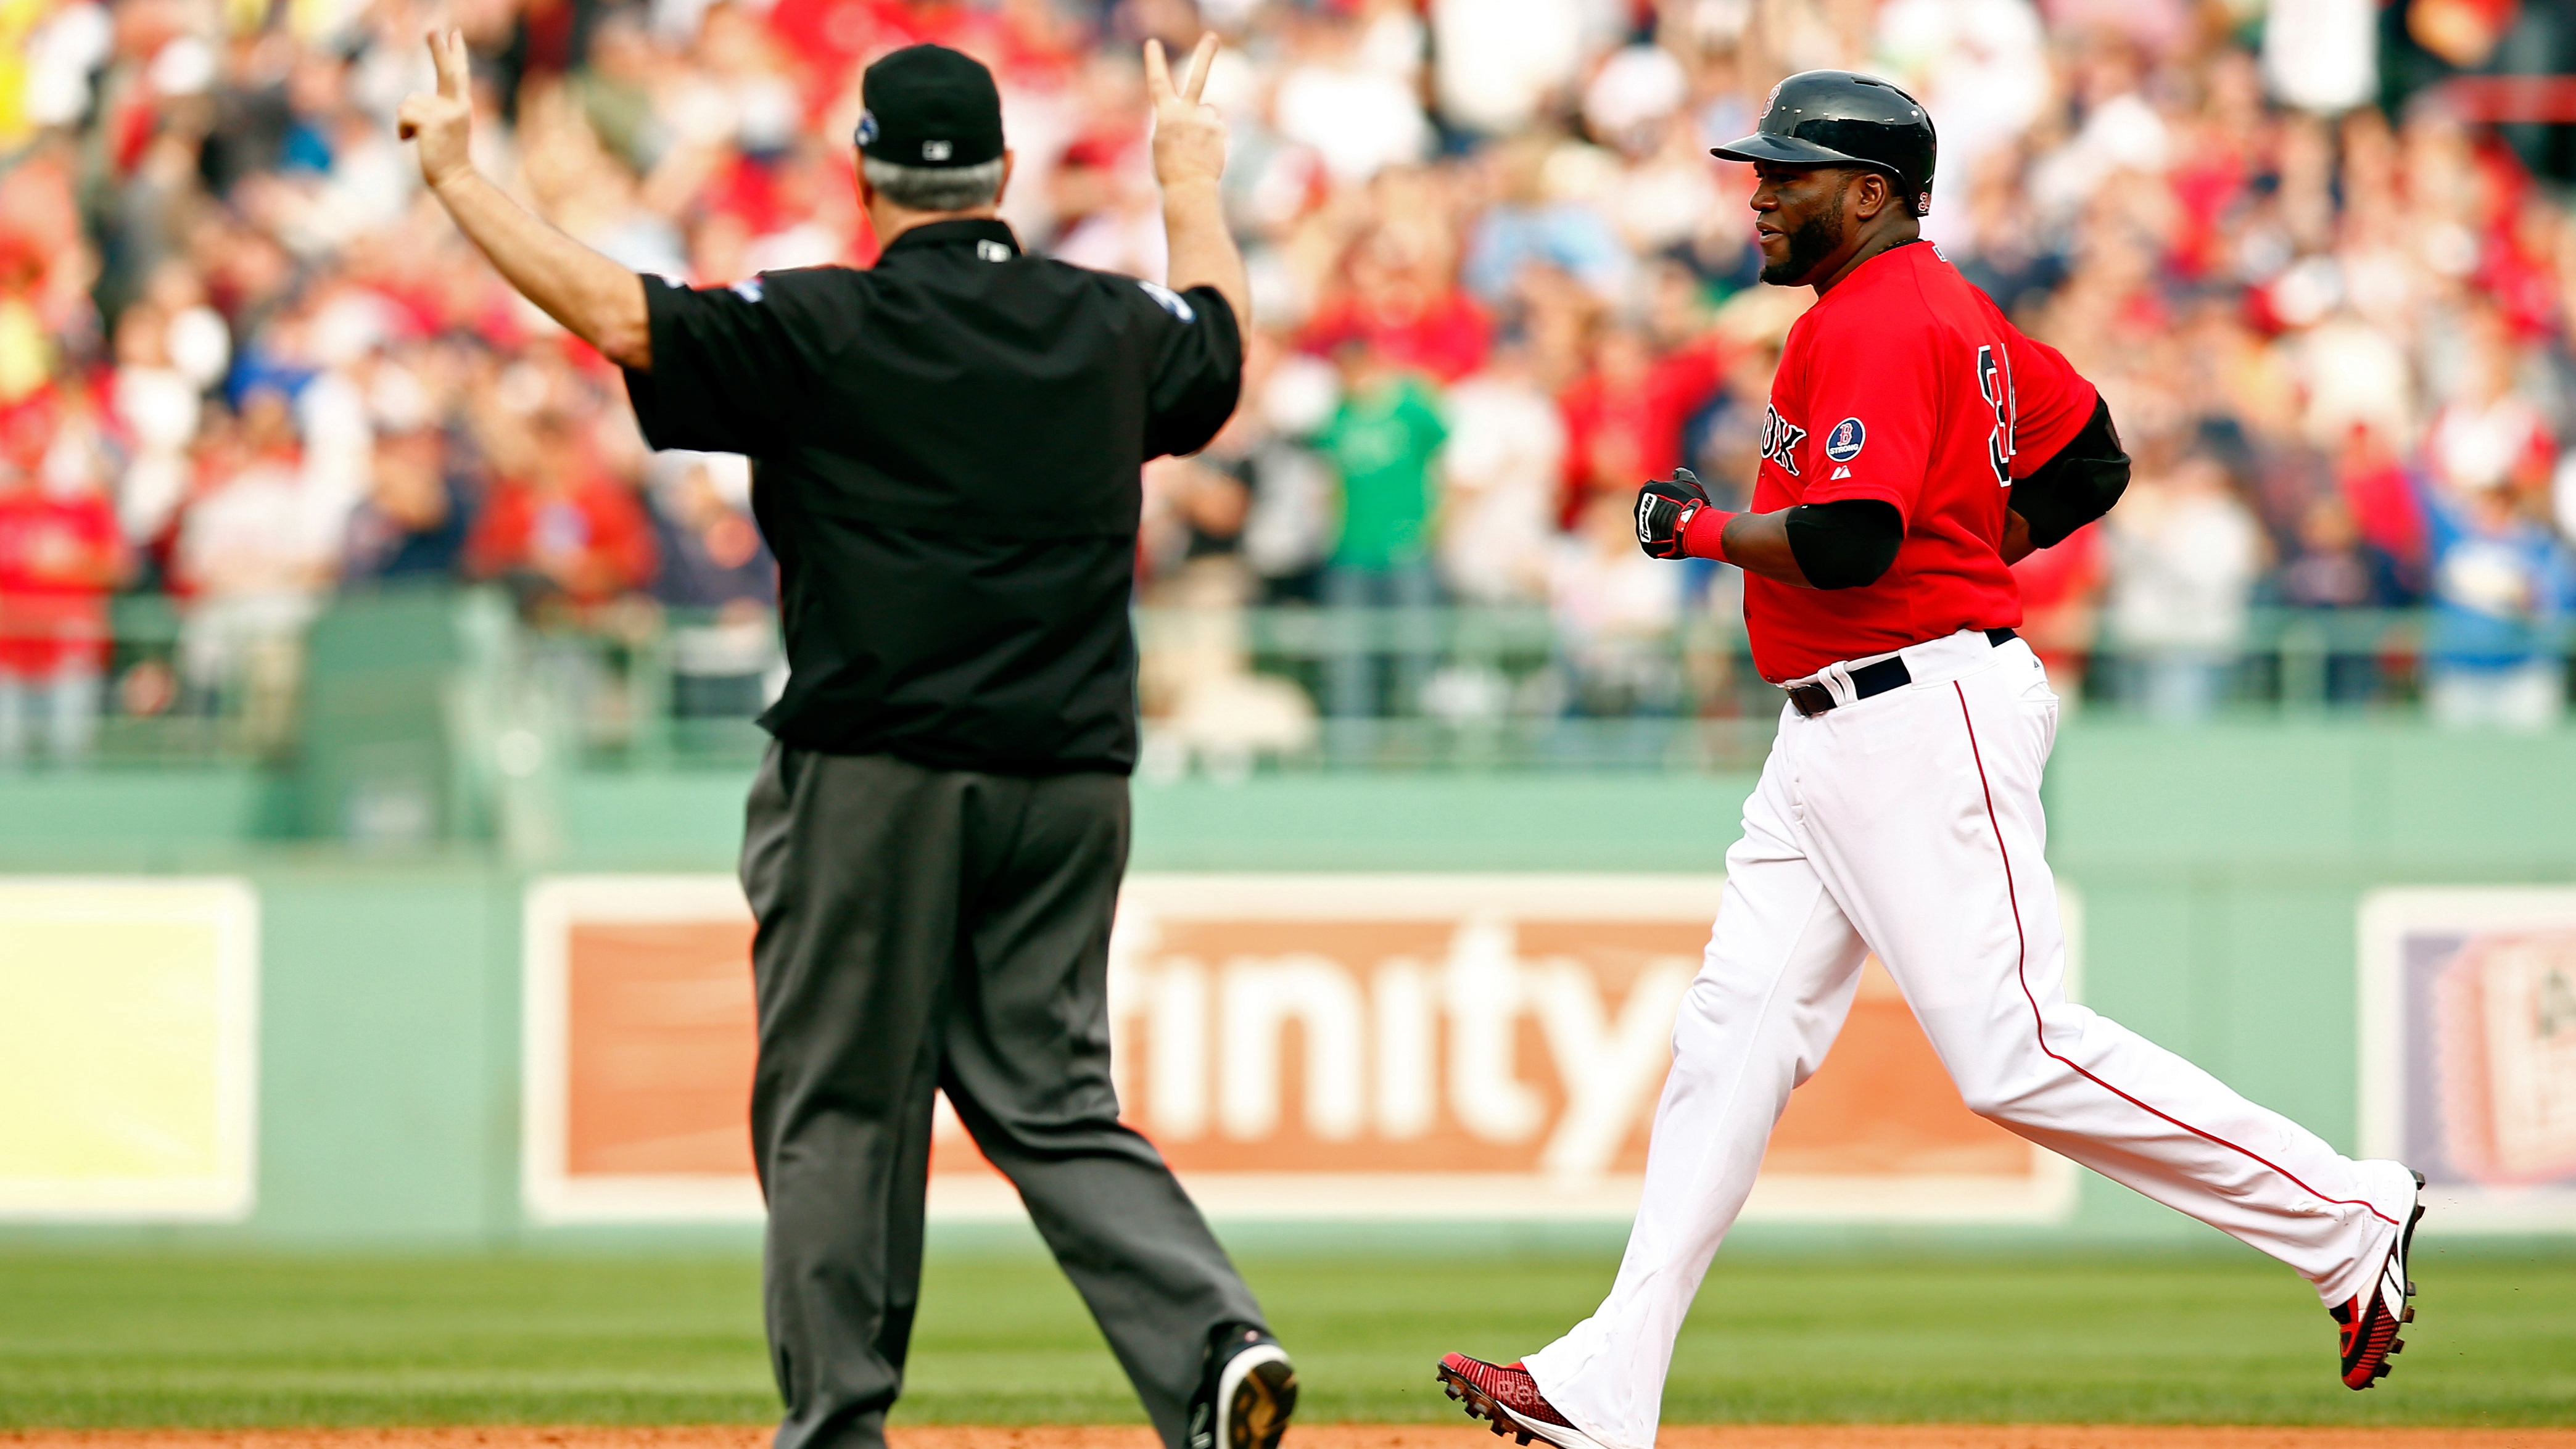 David Ortiz jogs into second for his ground rule double. (Photo by Jared Wickerham/Getty Images)